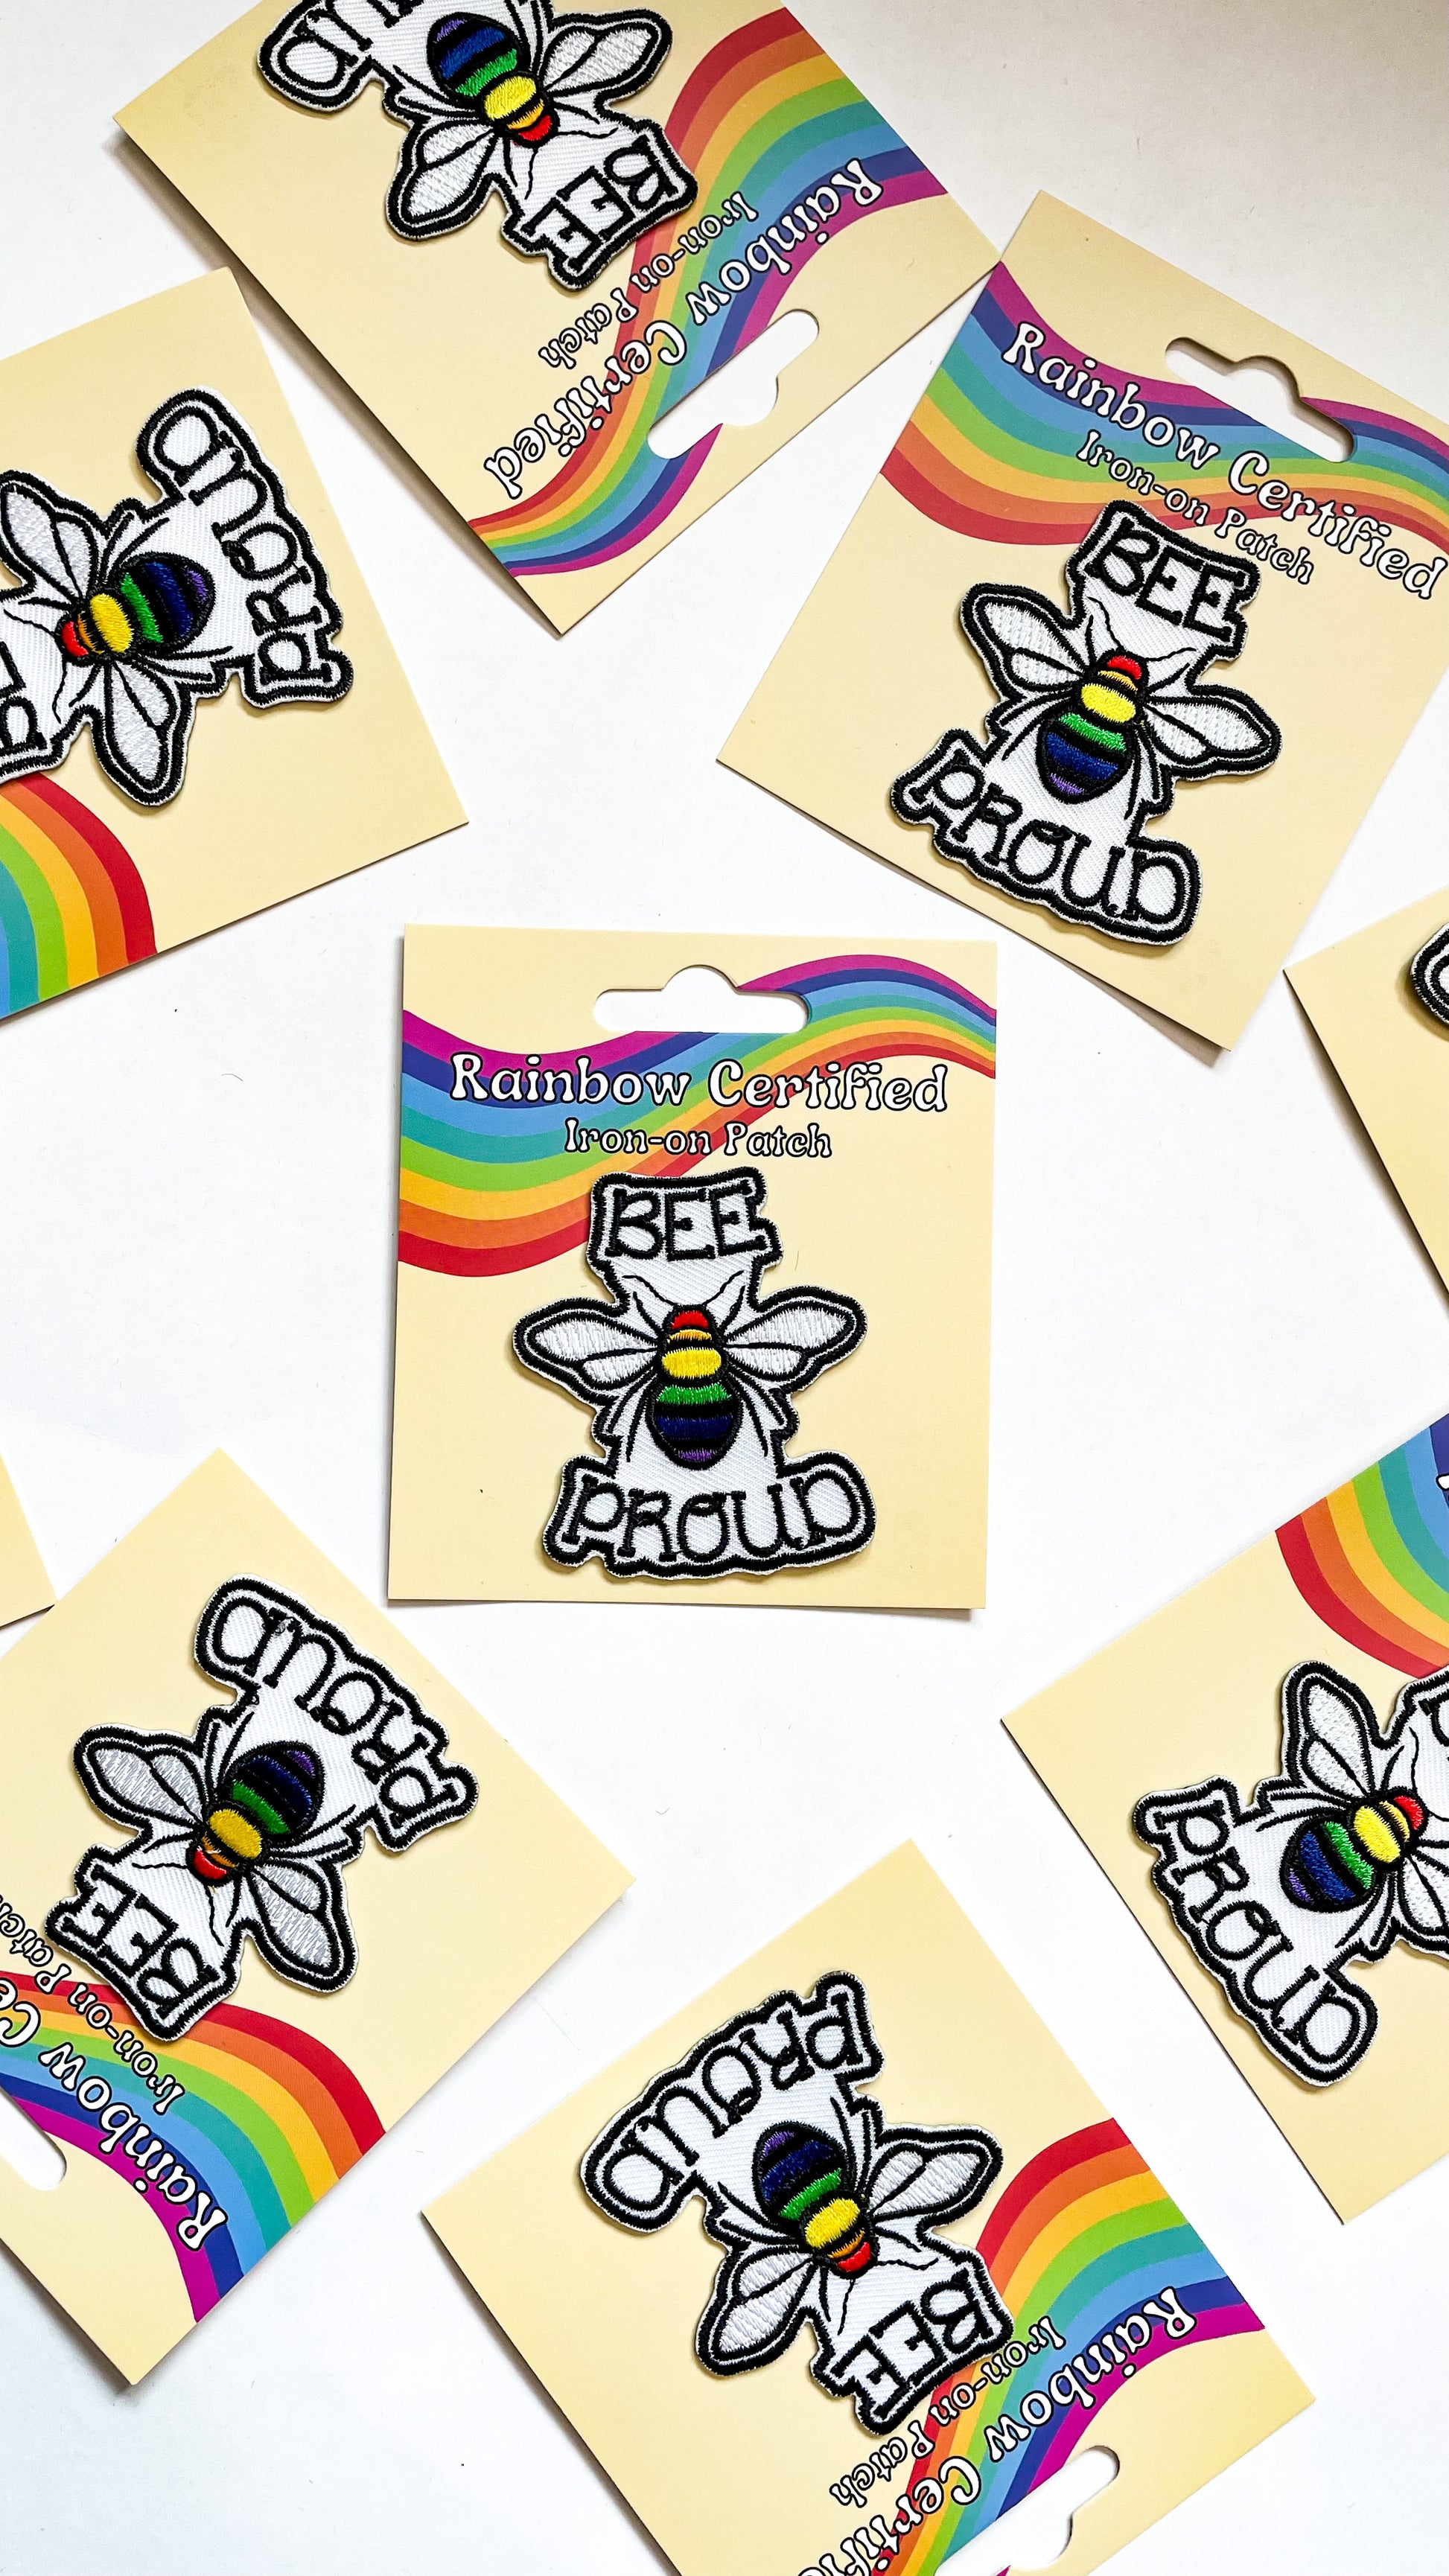 Bee Proud LGBTQ+ Iron-On Patch